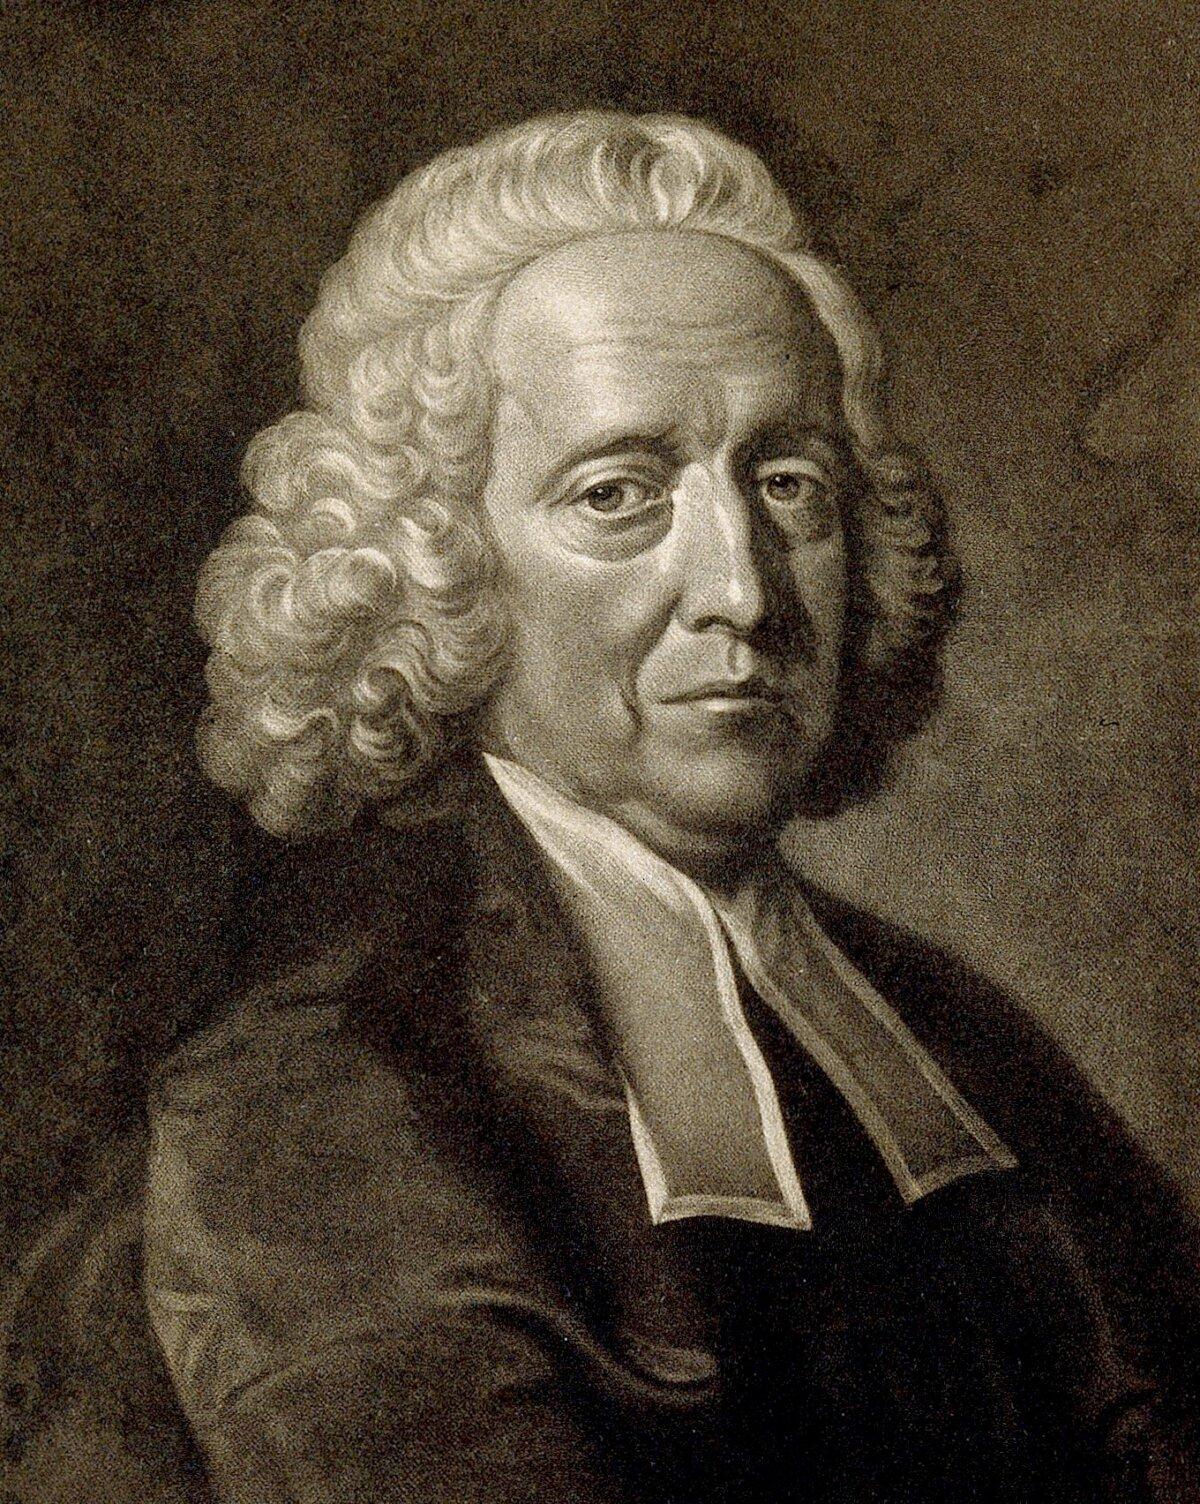 A portrait of Stephen Hales, mezzotint by J. McArdell after T. Hudson. (<a href="https://commons.wikimedia.org/wiki/User:Materialscientist">Materialscientist</a>/<a href="https://creativecommons.org/licenses/by/4.0/deed.en">CC BY-SA 4.0</a>)